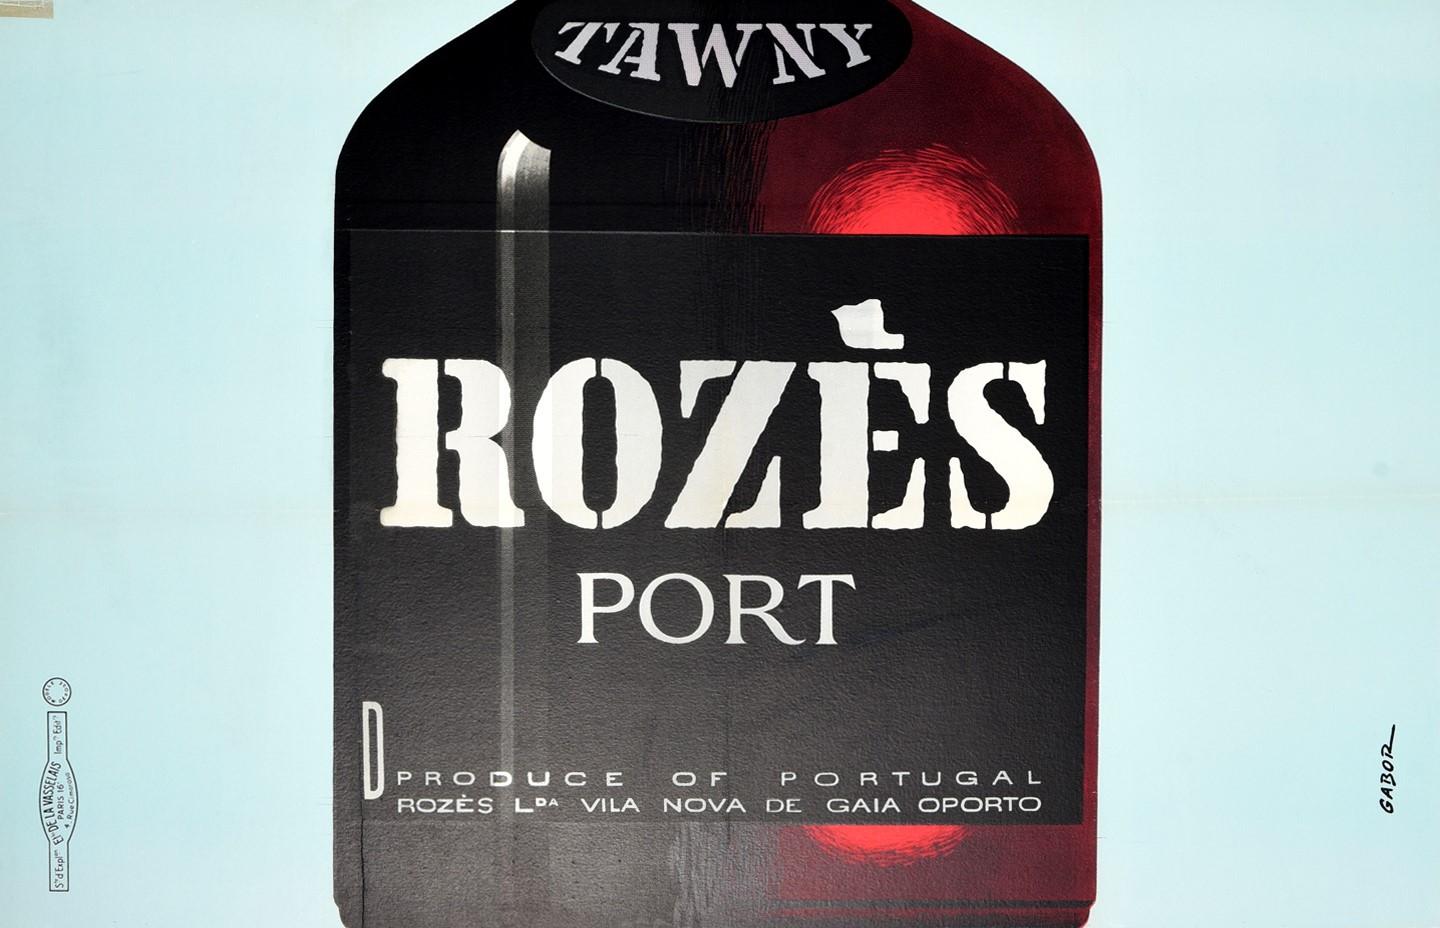 French Original Vintage Drink Advertising Poster Tawny Rozes Port Wine Portugal Oporto For Sale